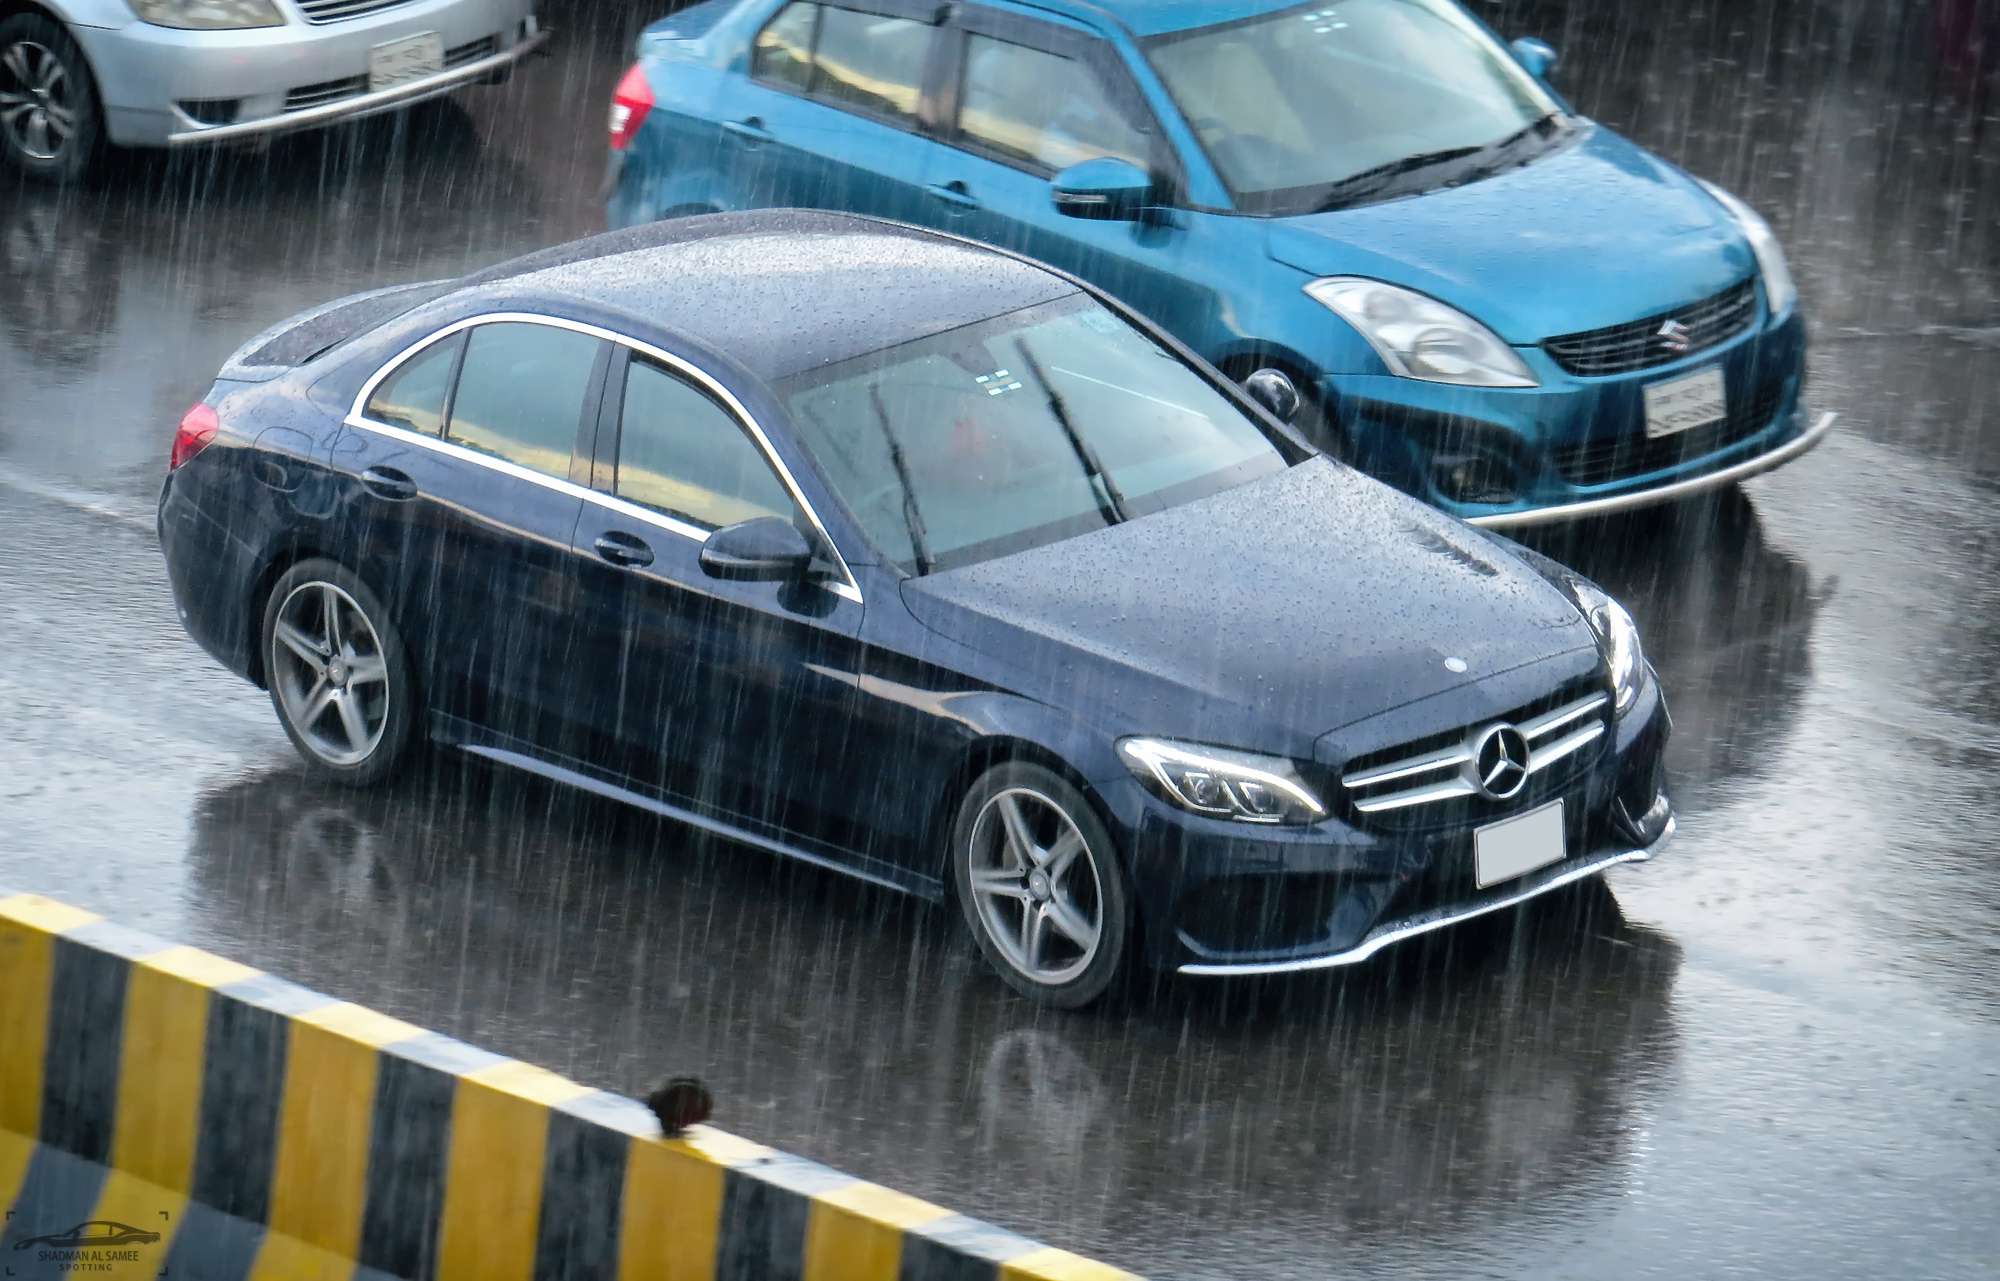 Valuable tips for driving in heavy rain